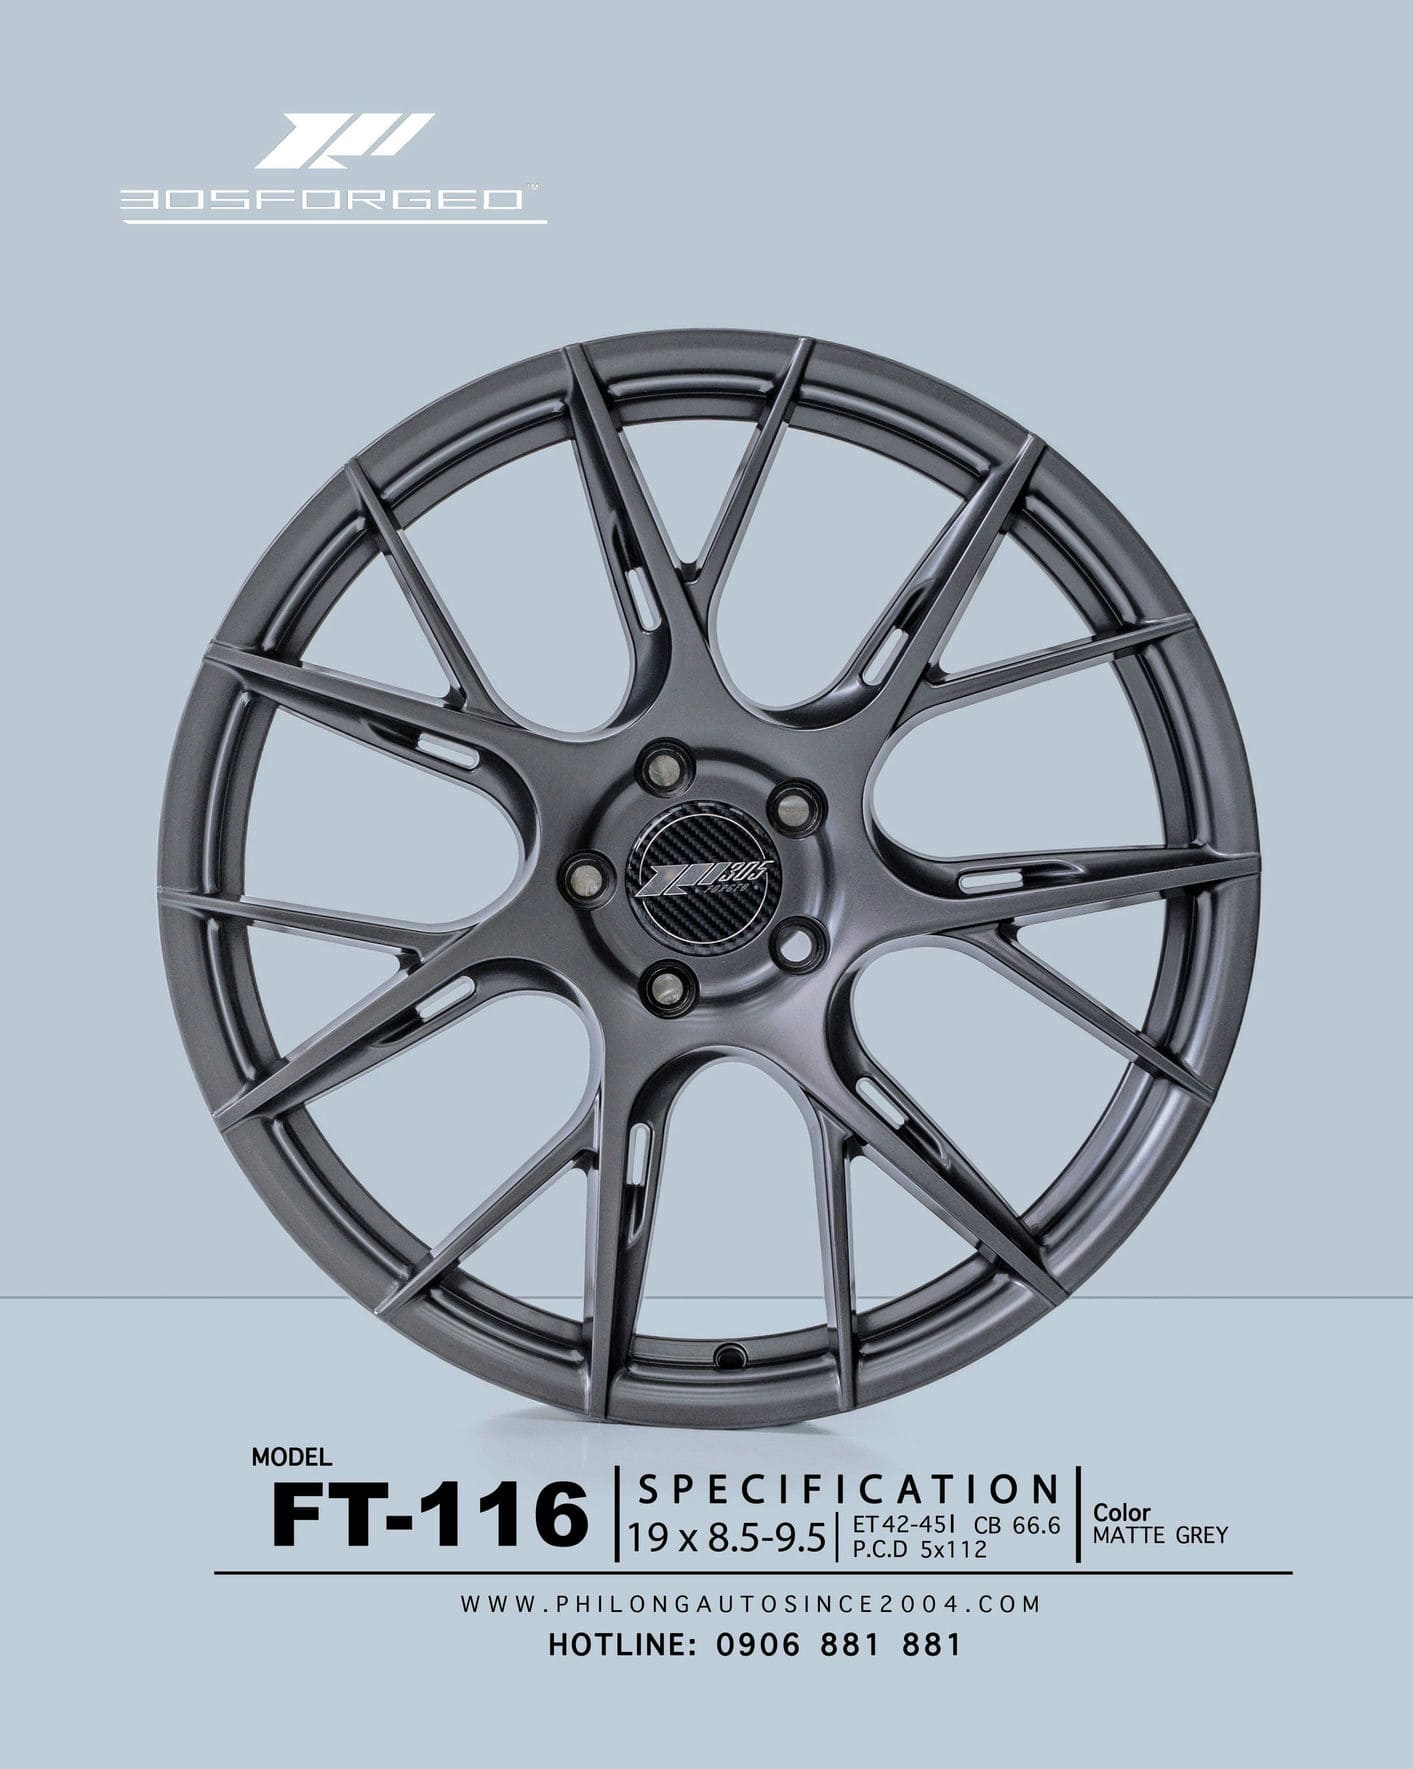 305 FORGED FT 116 (2)